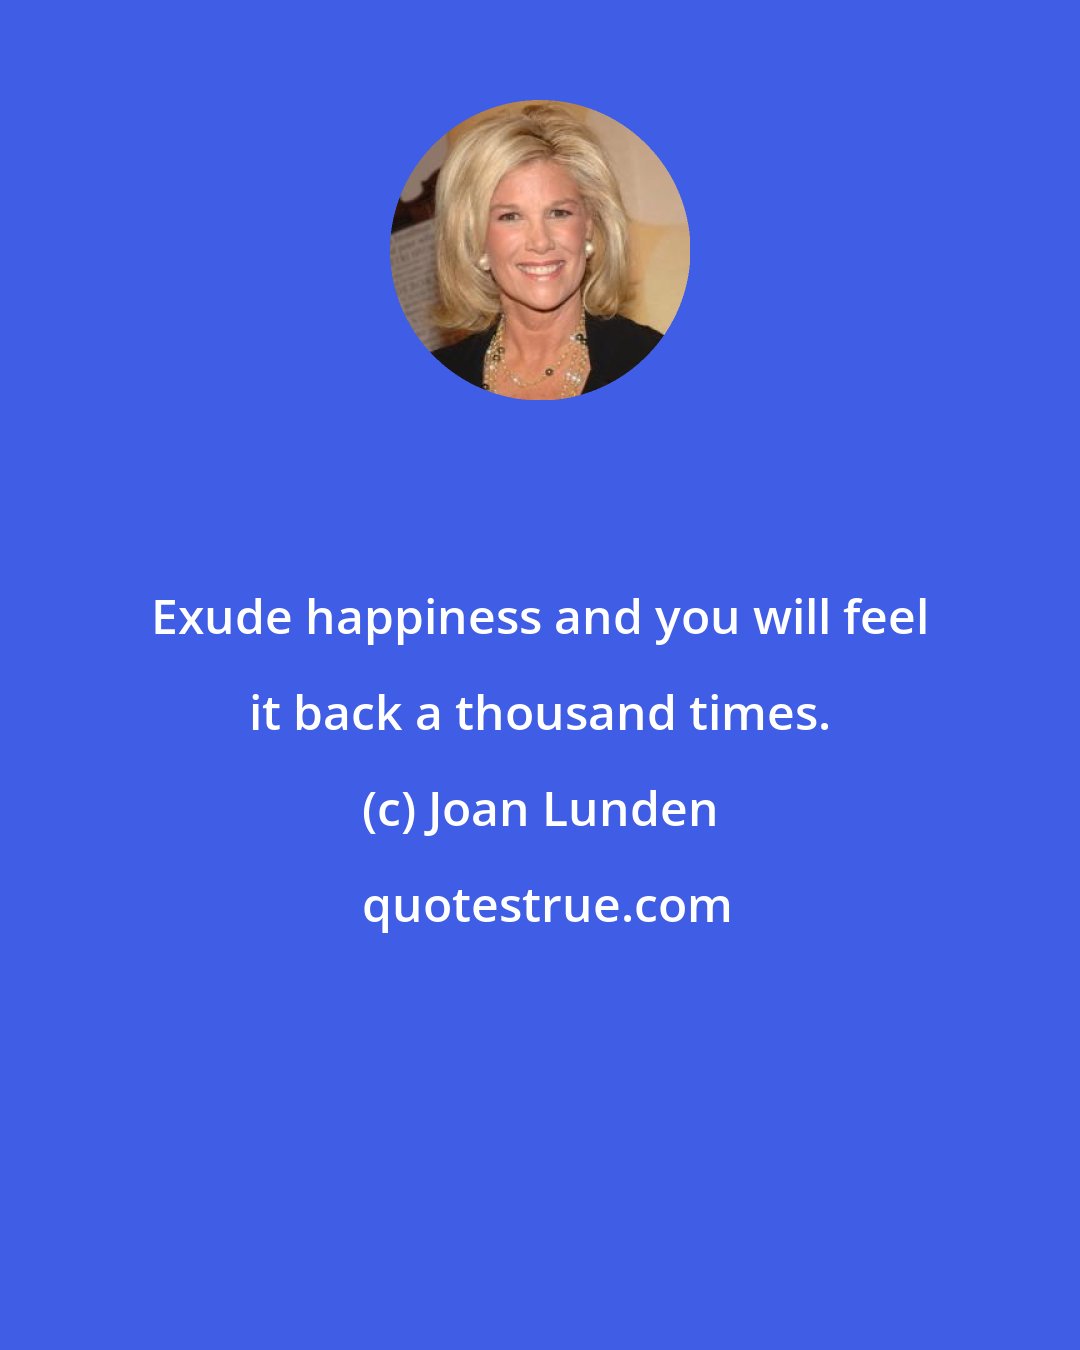 Joan Lunden: Exude happiness and you will feel it back a thousand times.